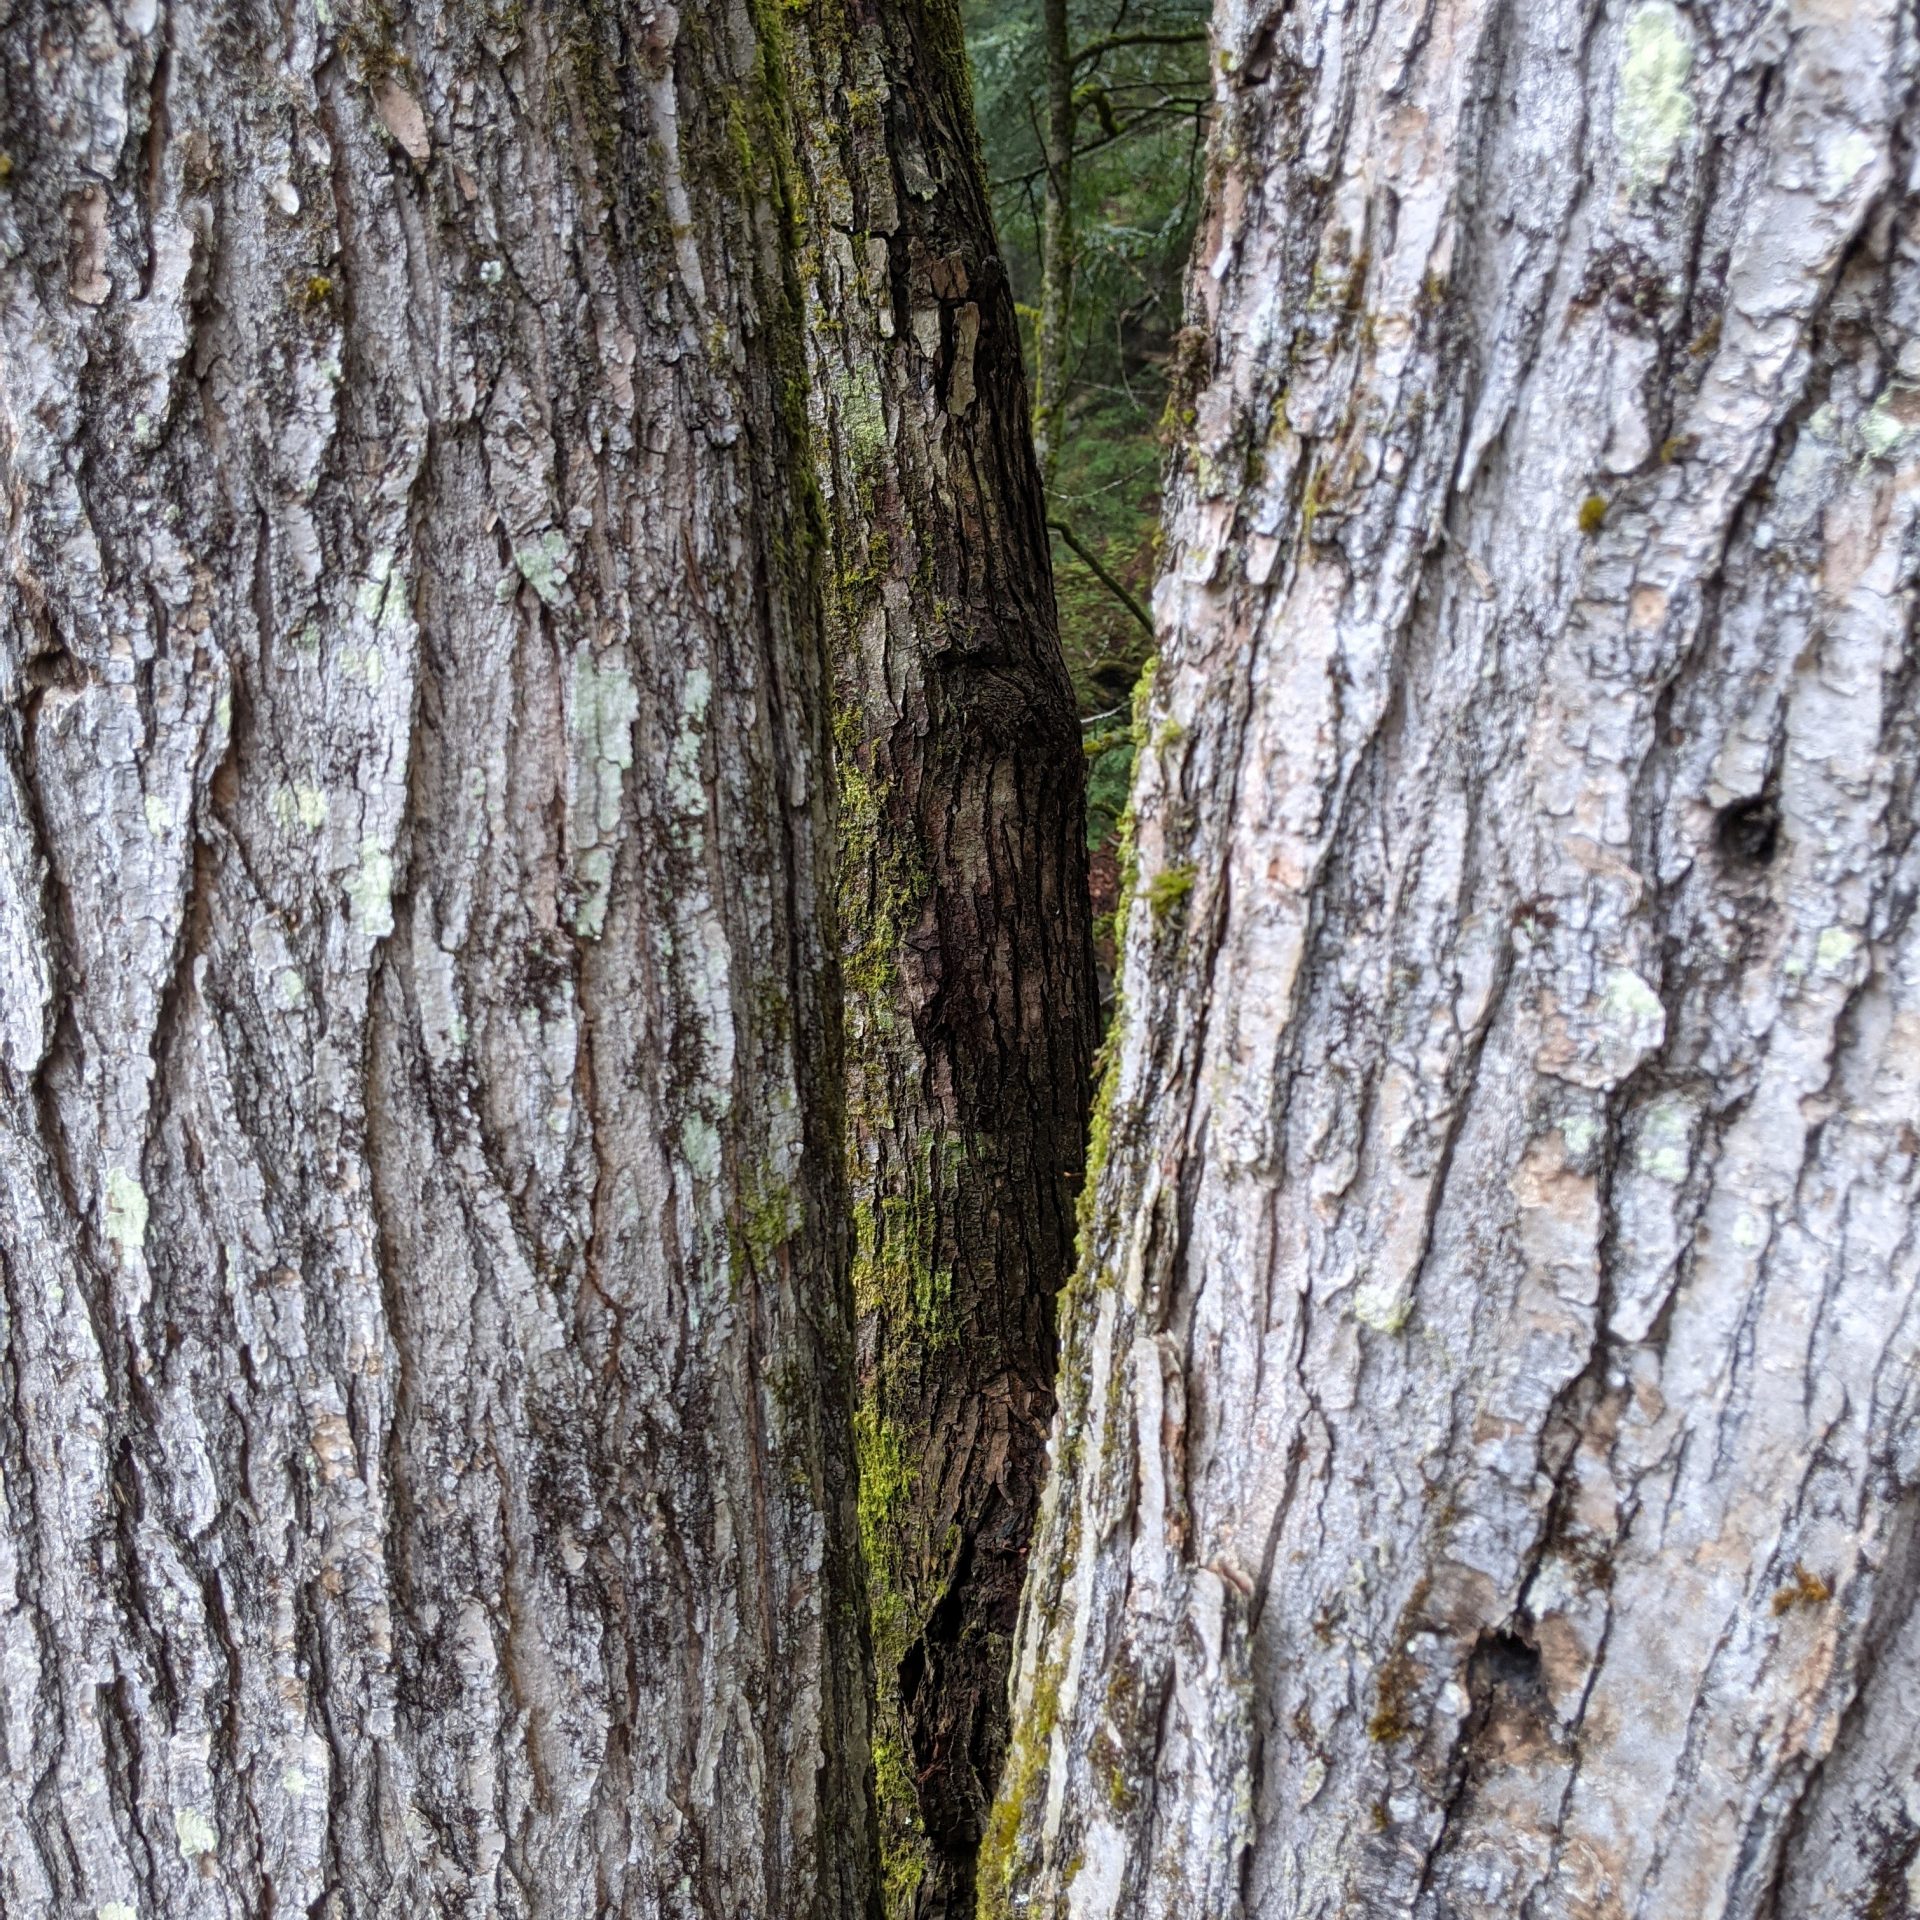 tap hole in a tree